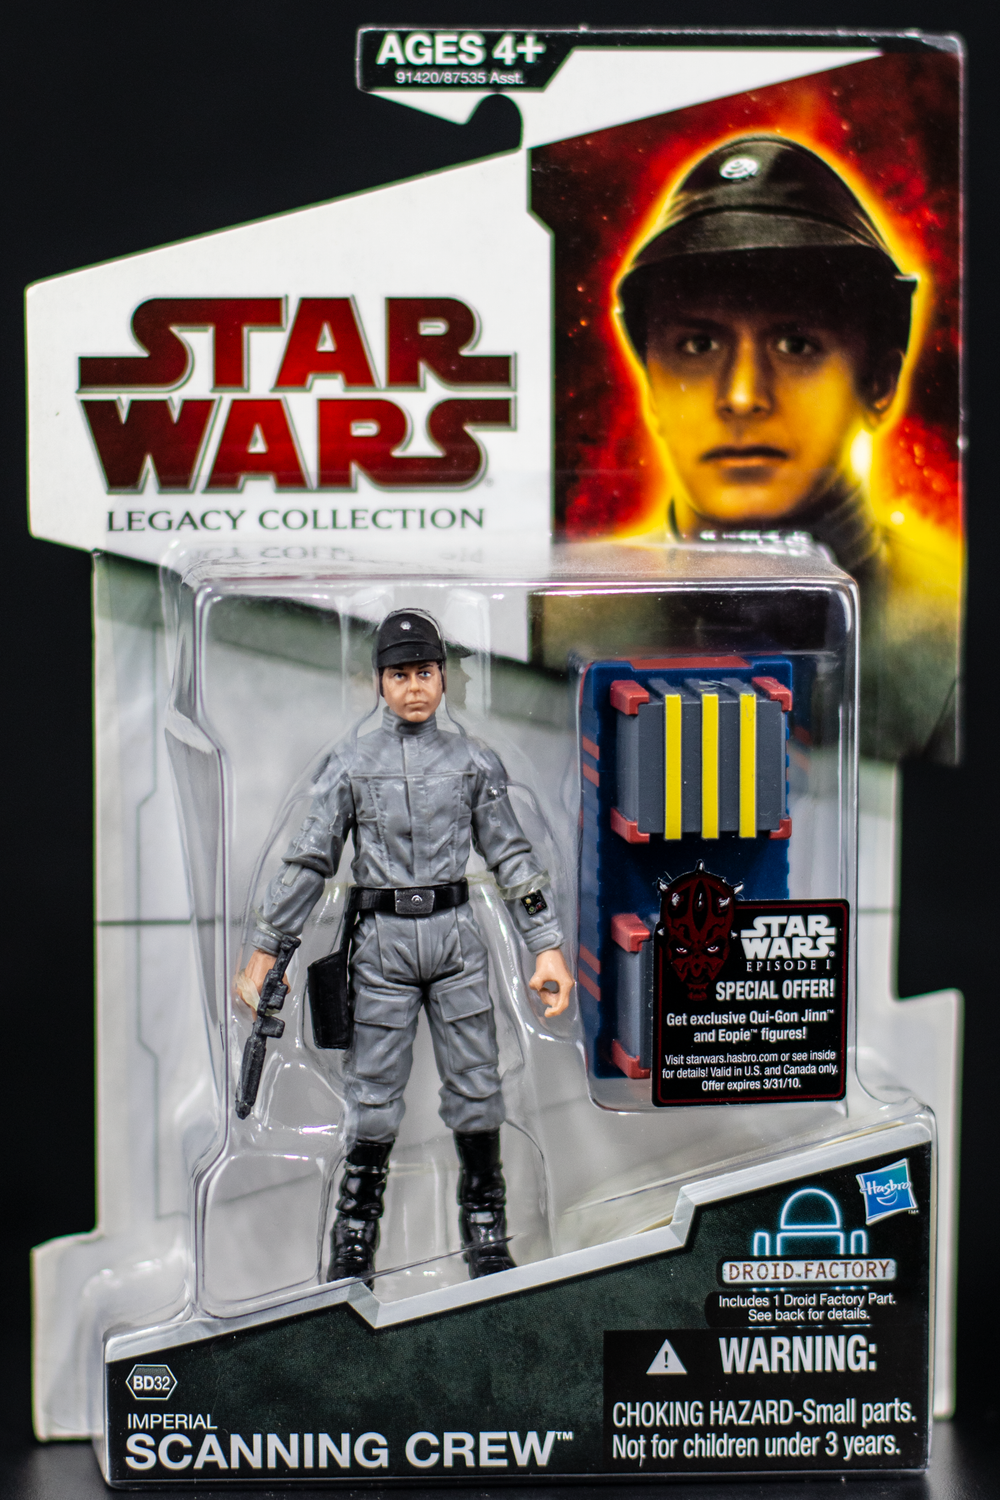 Star Wars: Legacy Collection "Imperial Scanning Crew"